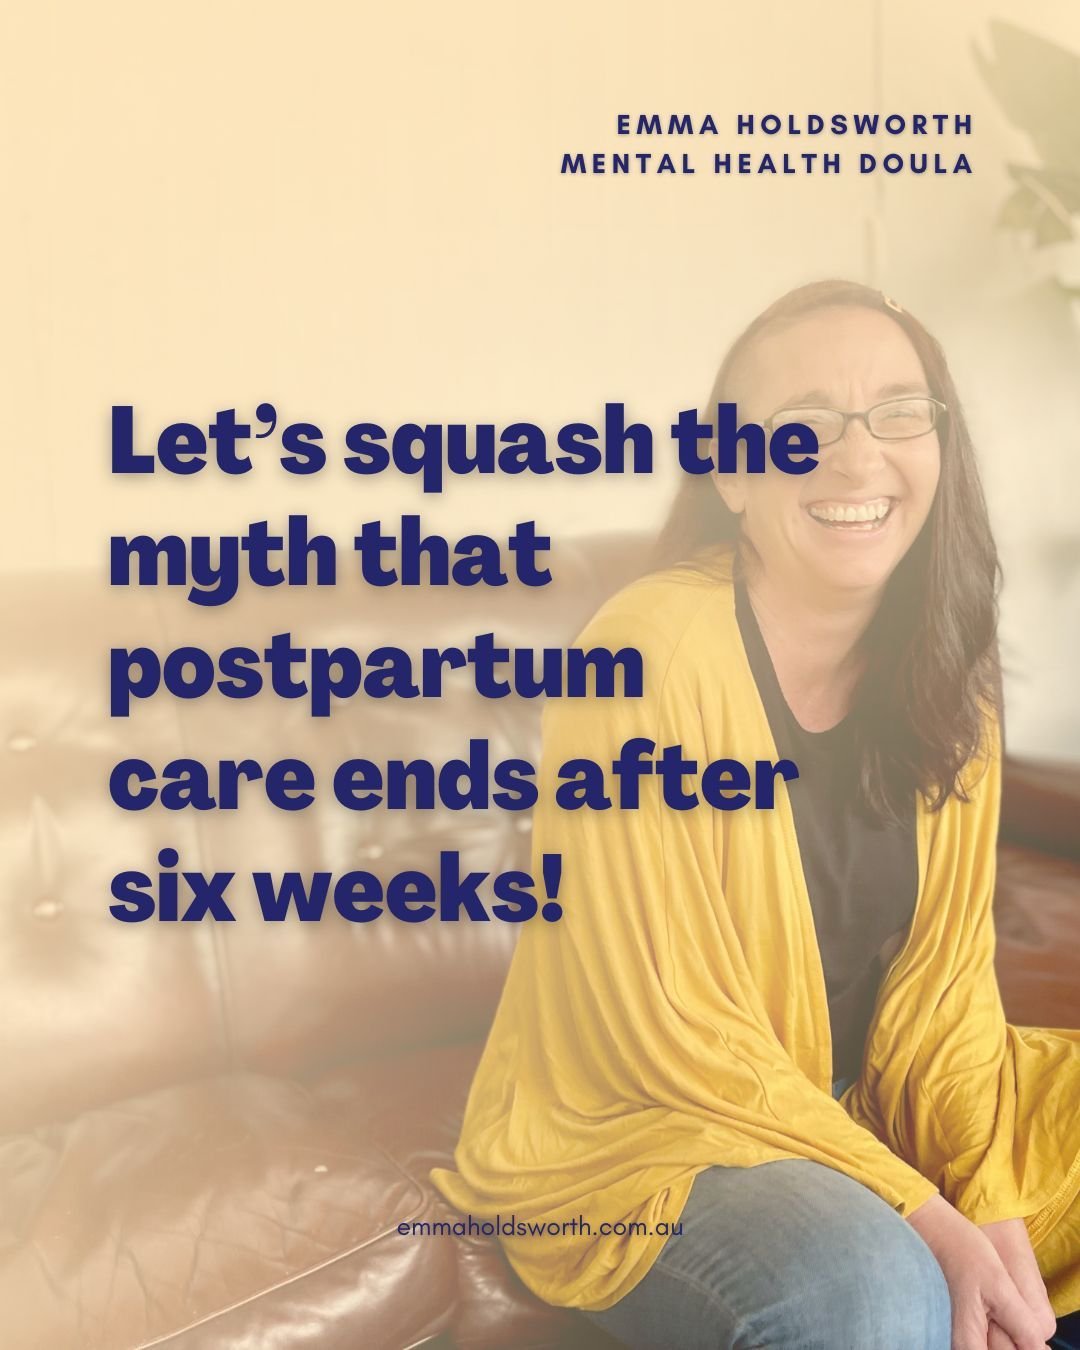 Let&rsquo;s squash the myth that postpartum care ends after six weeks! 

As the Mental Health Doula, this is something I am extremely passionate about (especially considering the whirlwind of once-in-a-lifetime-world-events we&rsquo;ve been through l